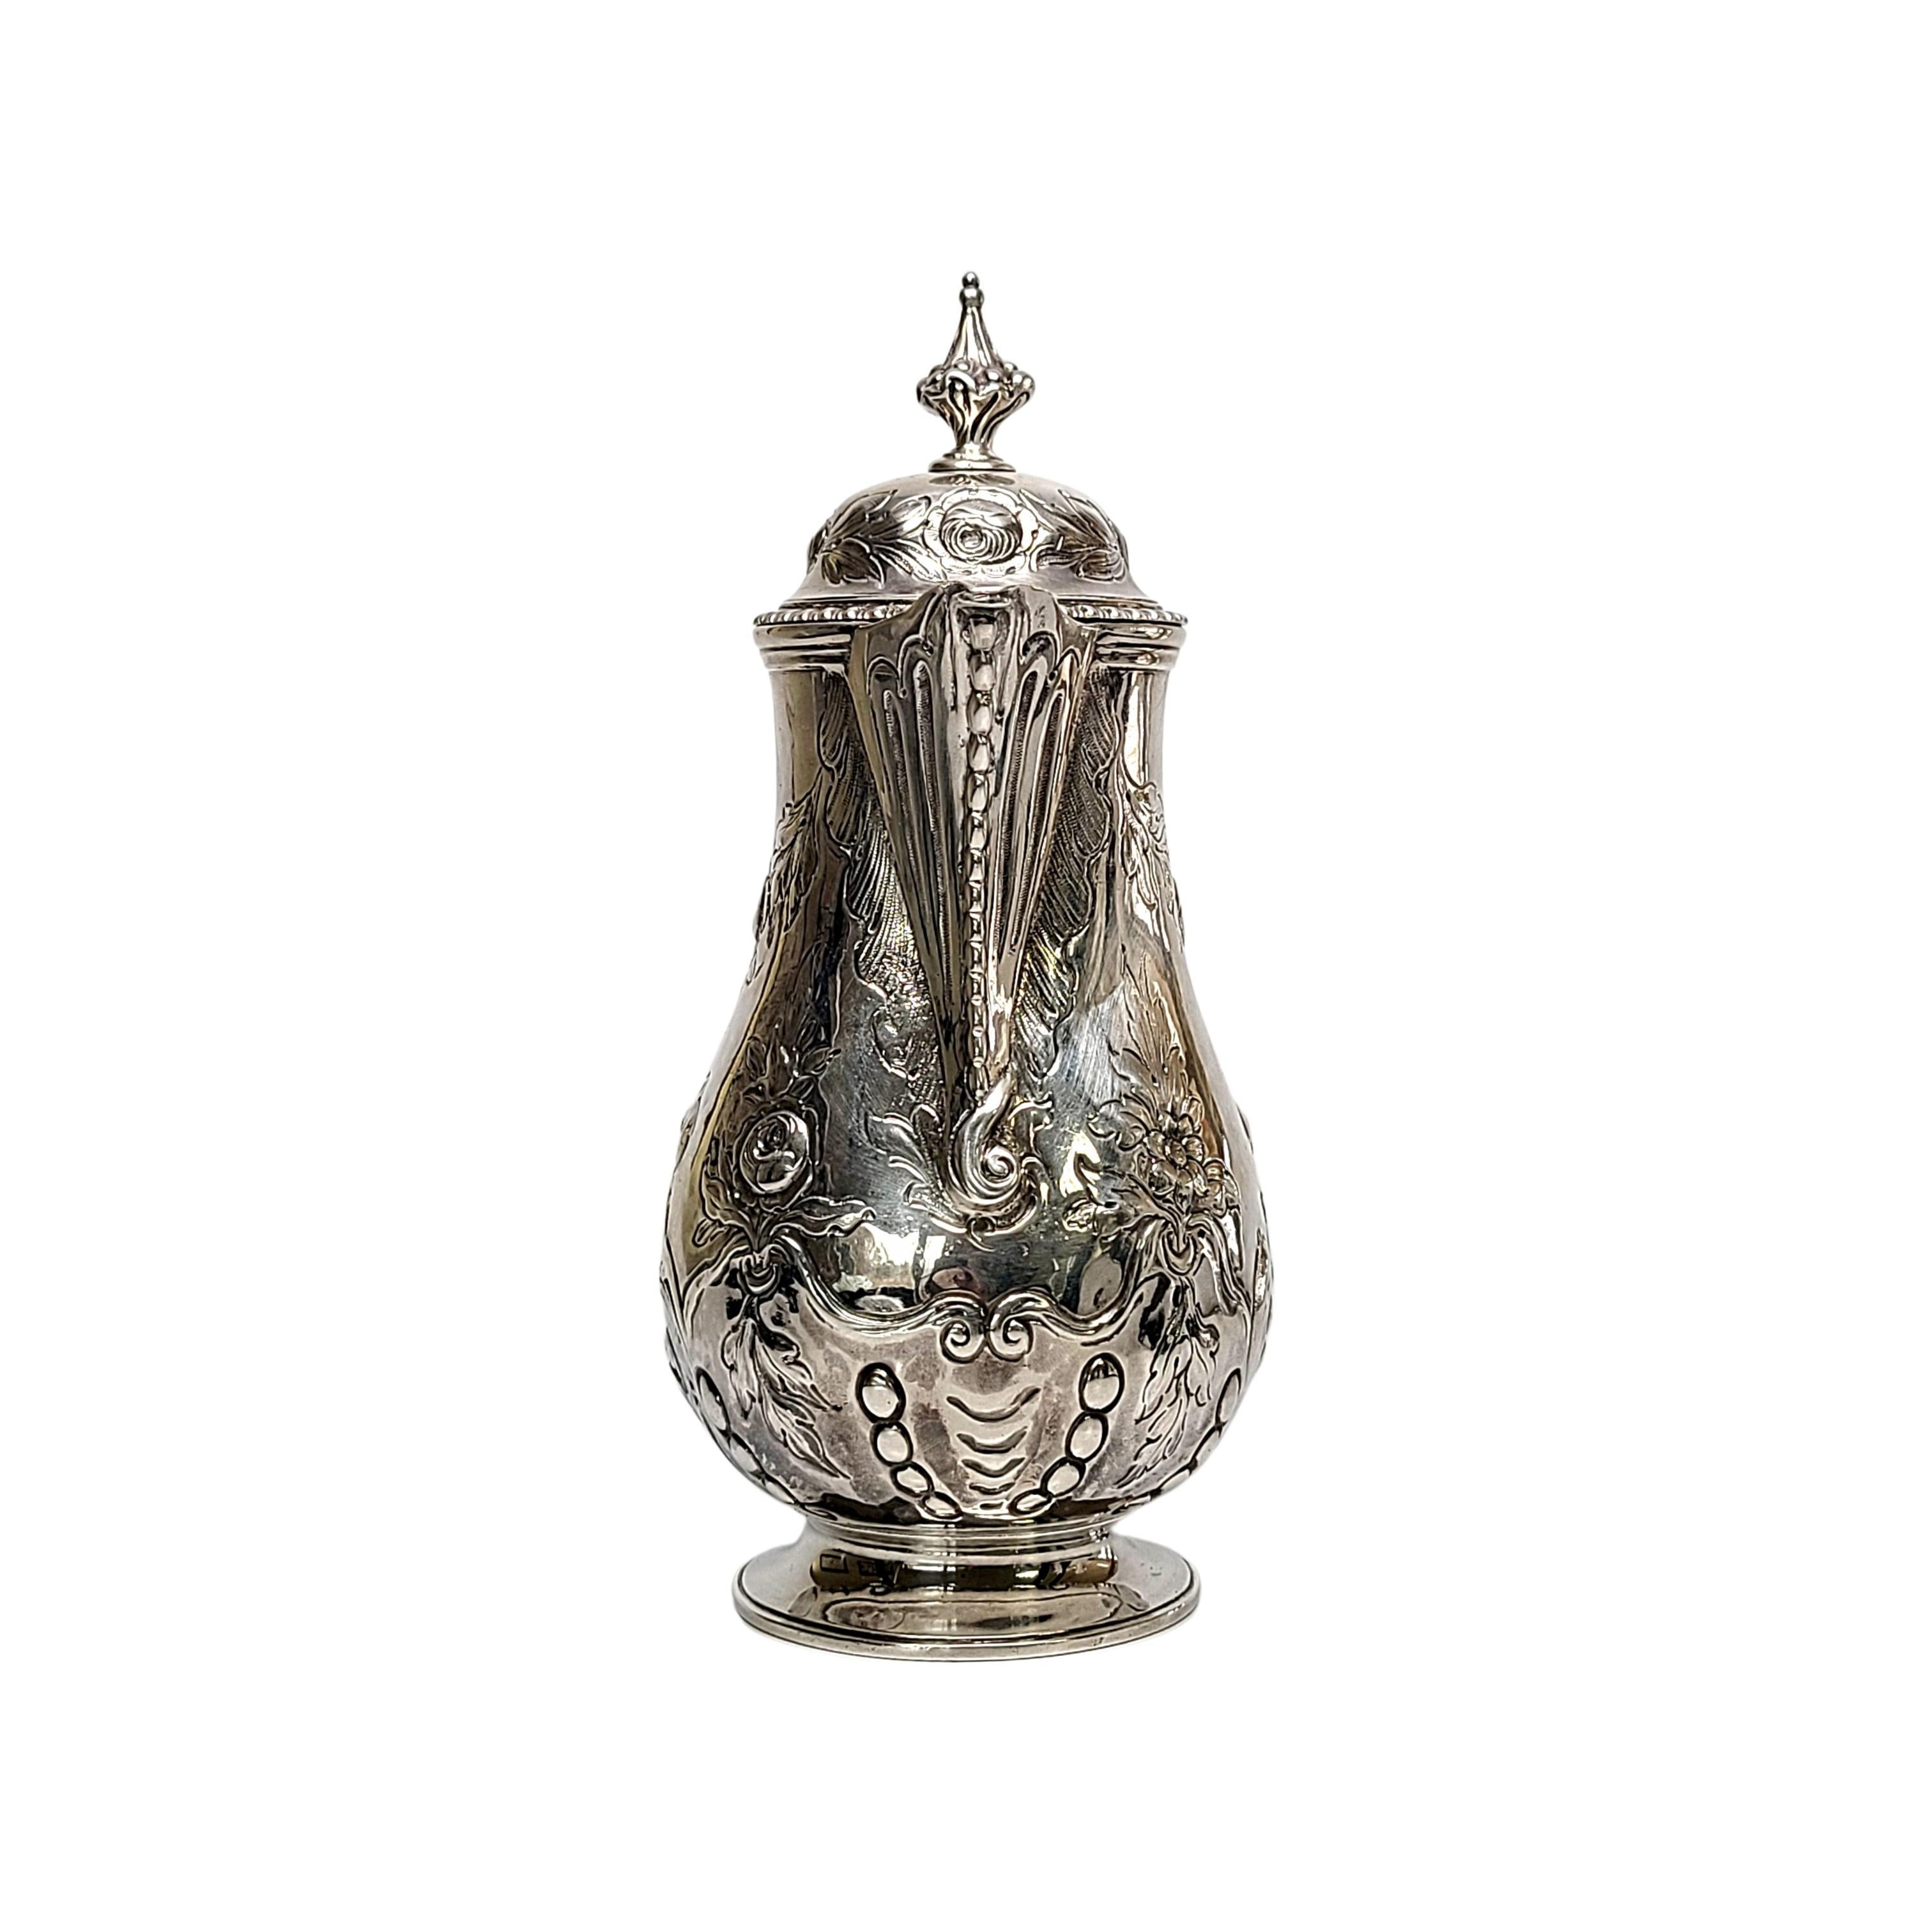 George III era sterling silver hot milk jug by Jon King of London, England, circa 1776.

Beautiful and elegant oval baluster form on a domed foot featuring a hinged lid with finial lid topper, scroll design black wood handle and beaded edge beak